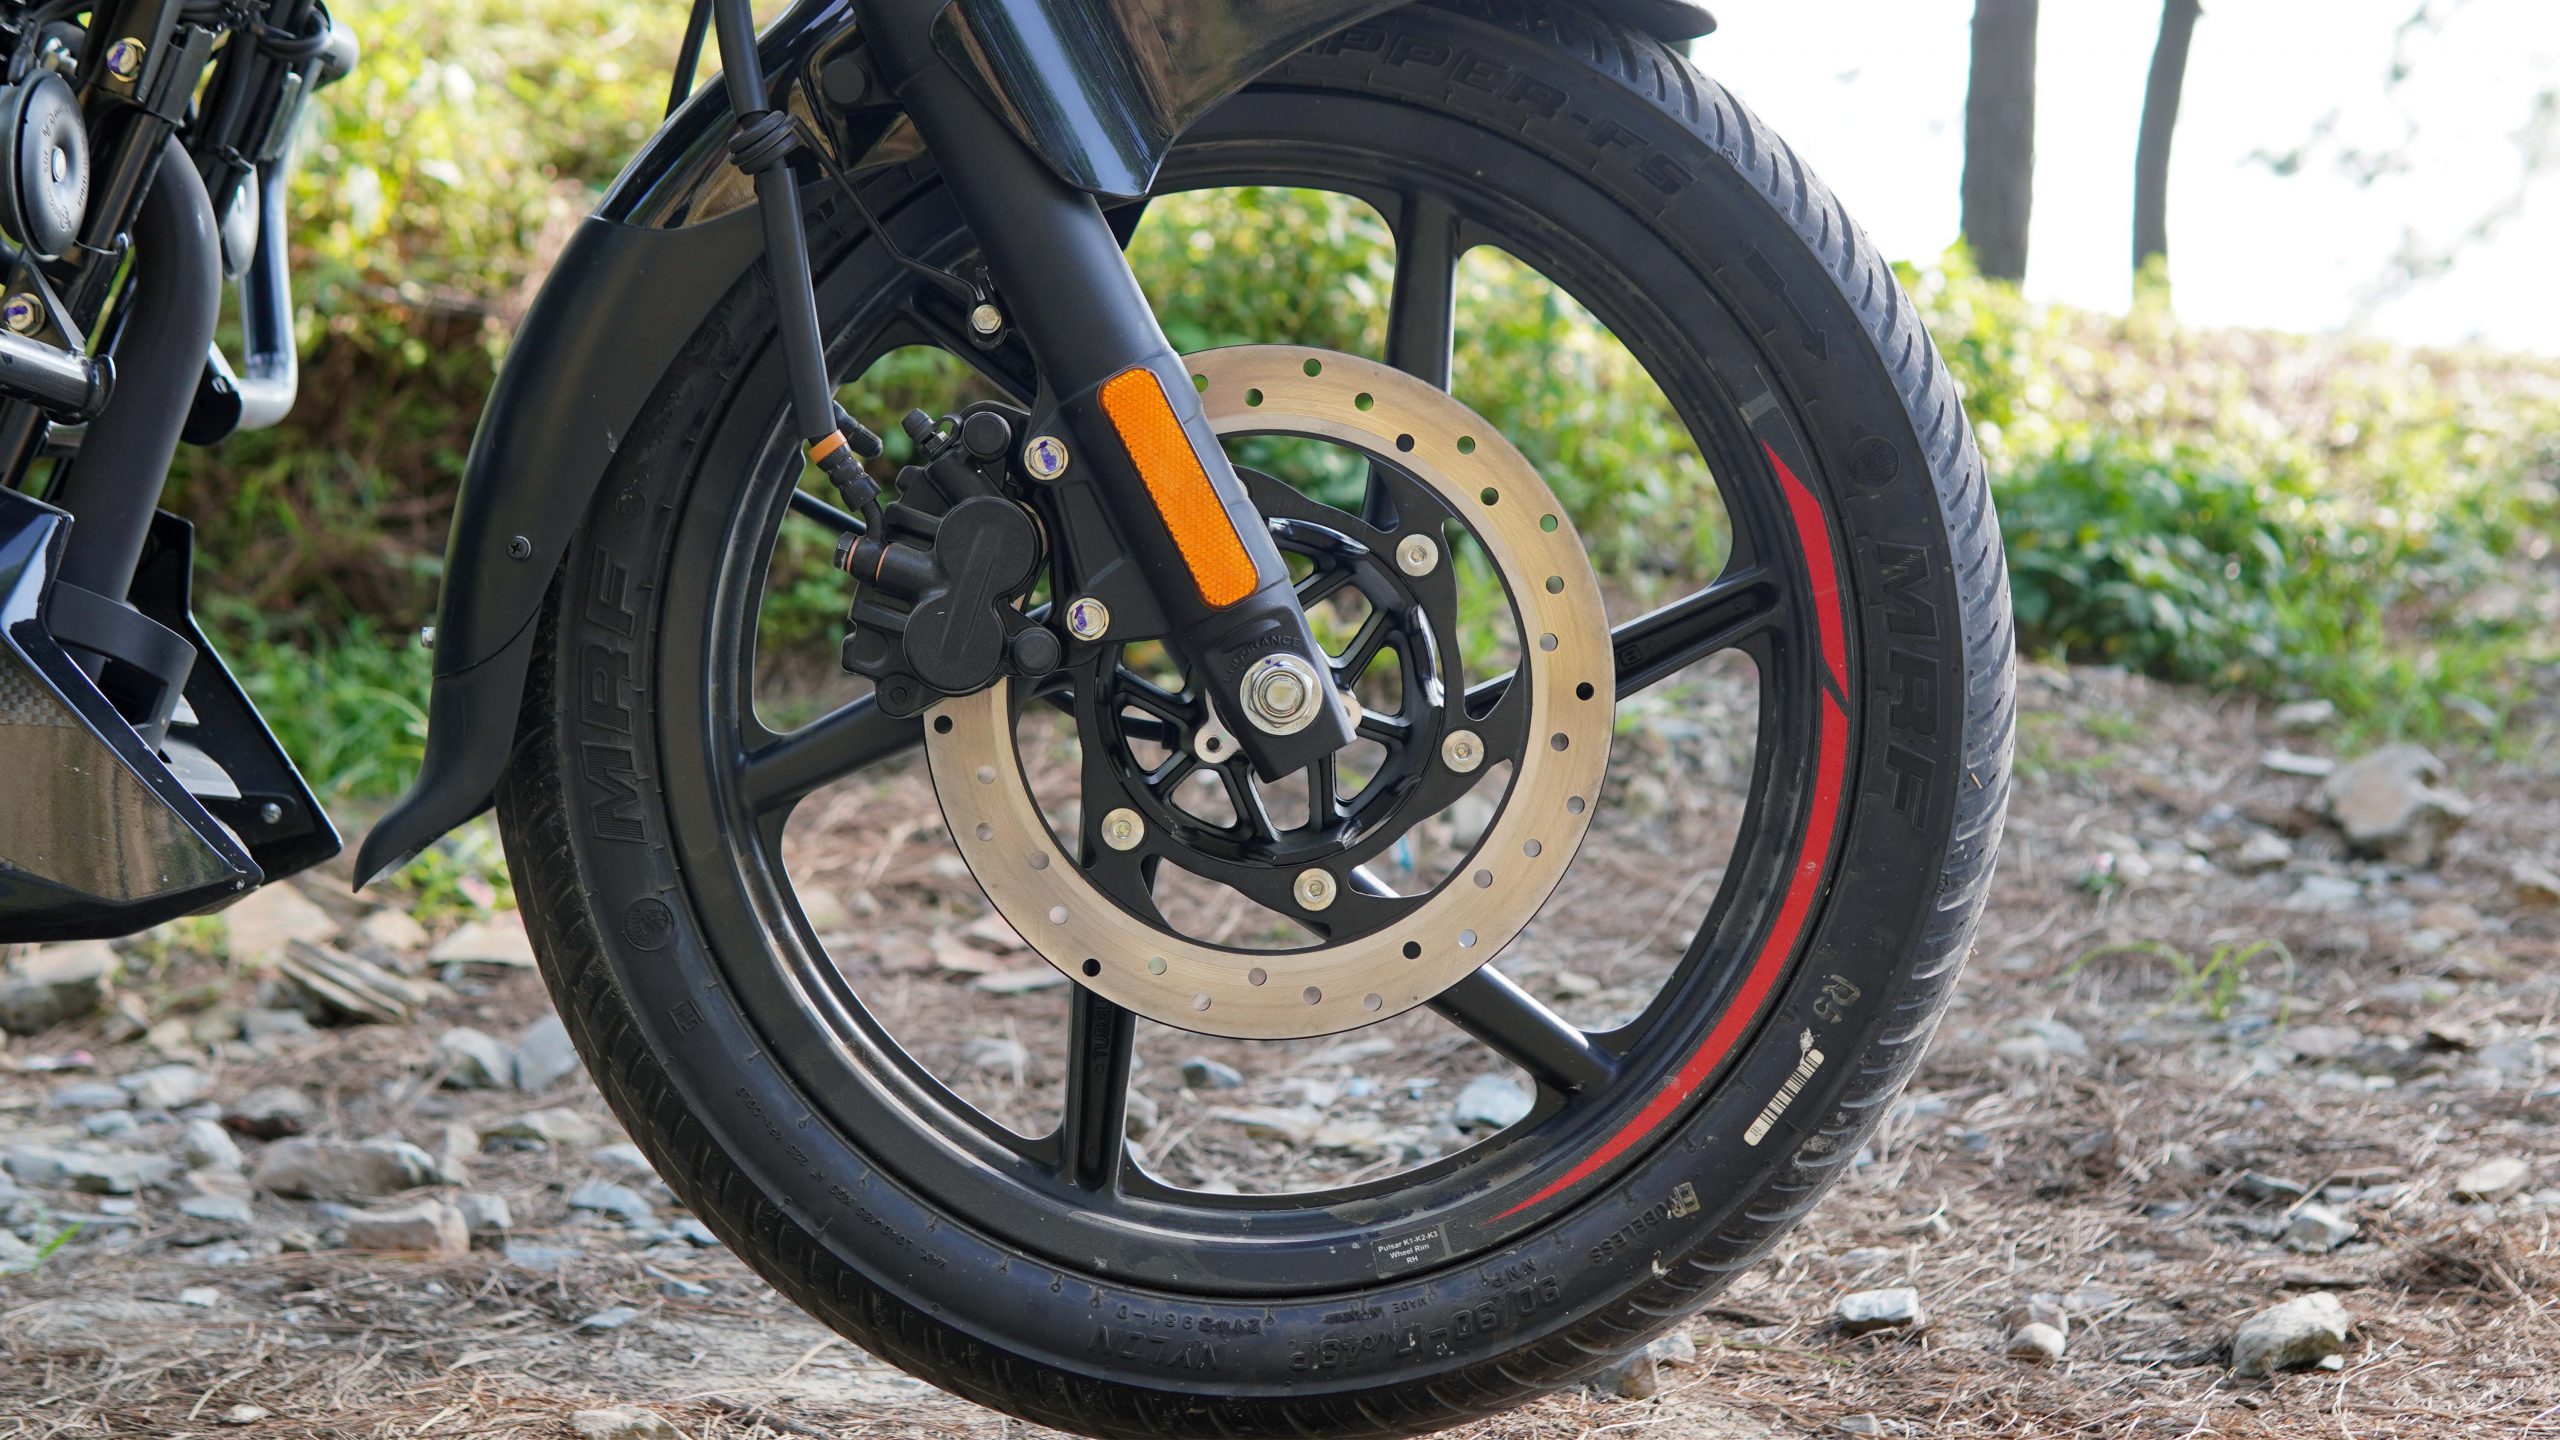 Larger Front Disc with Wider Tyre